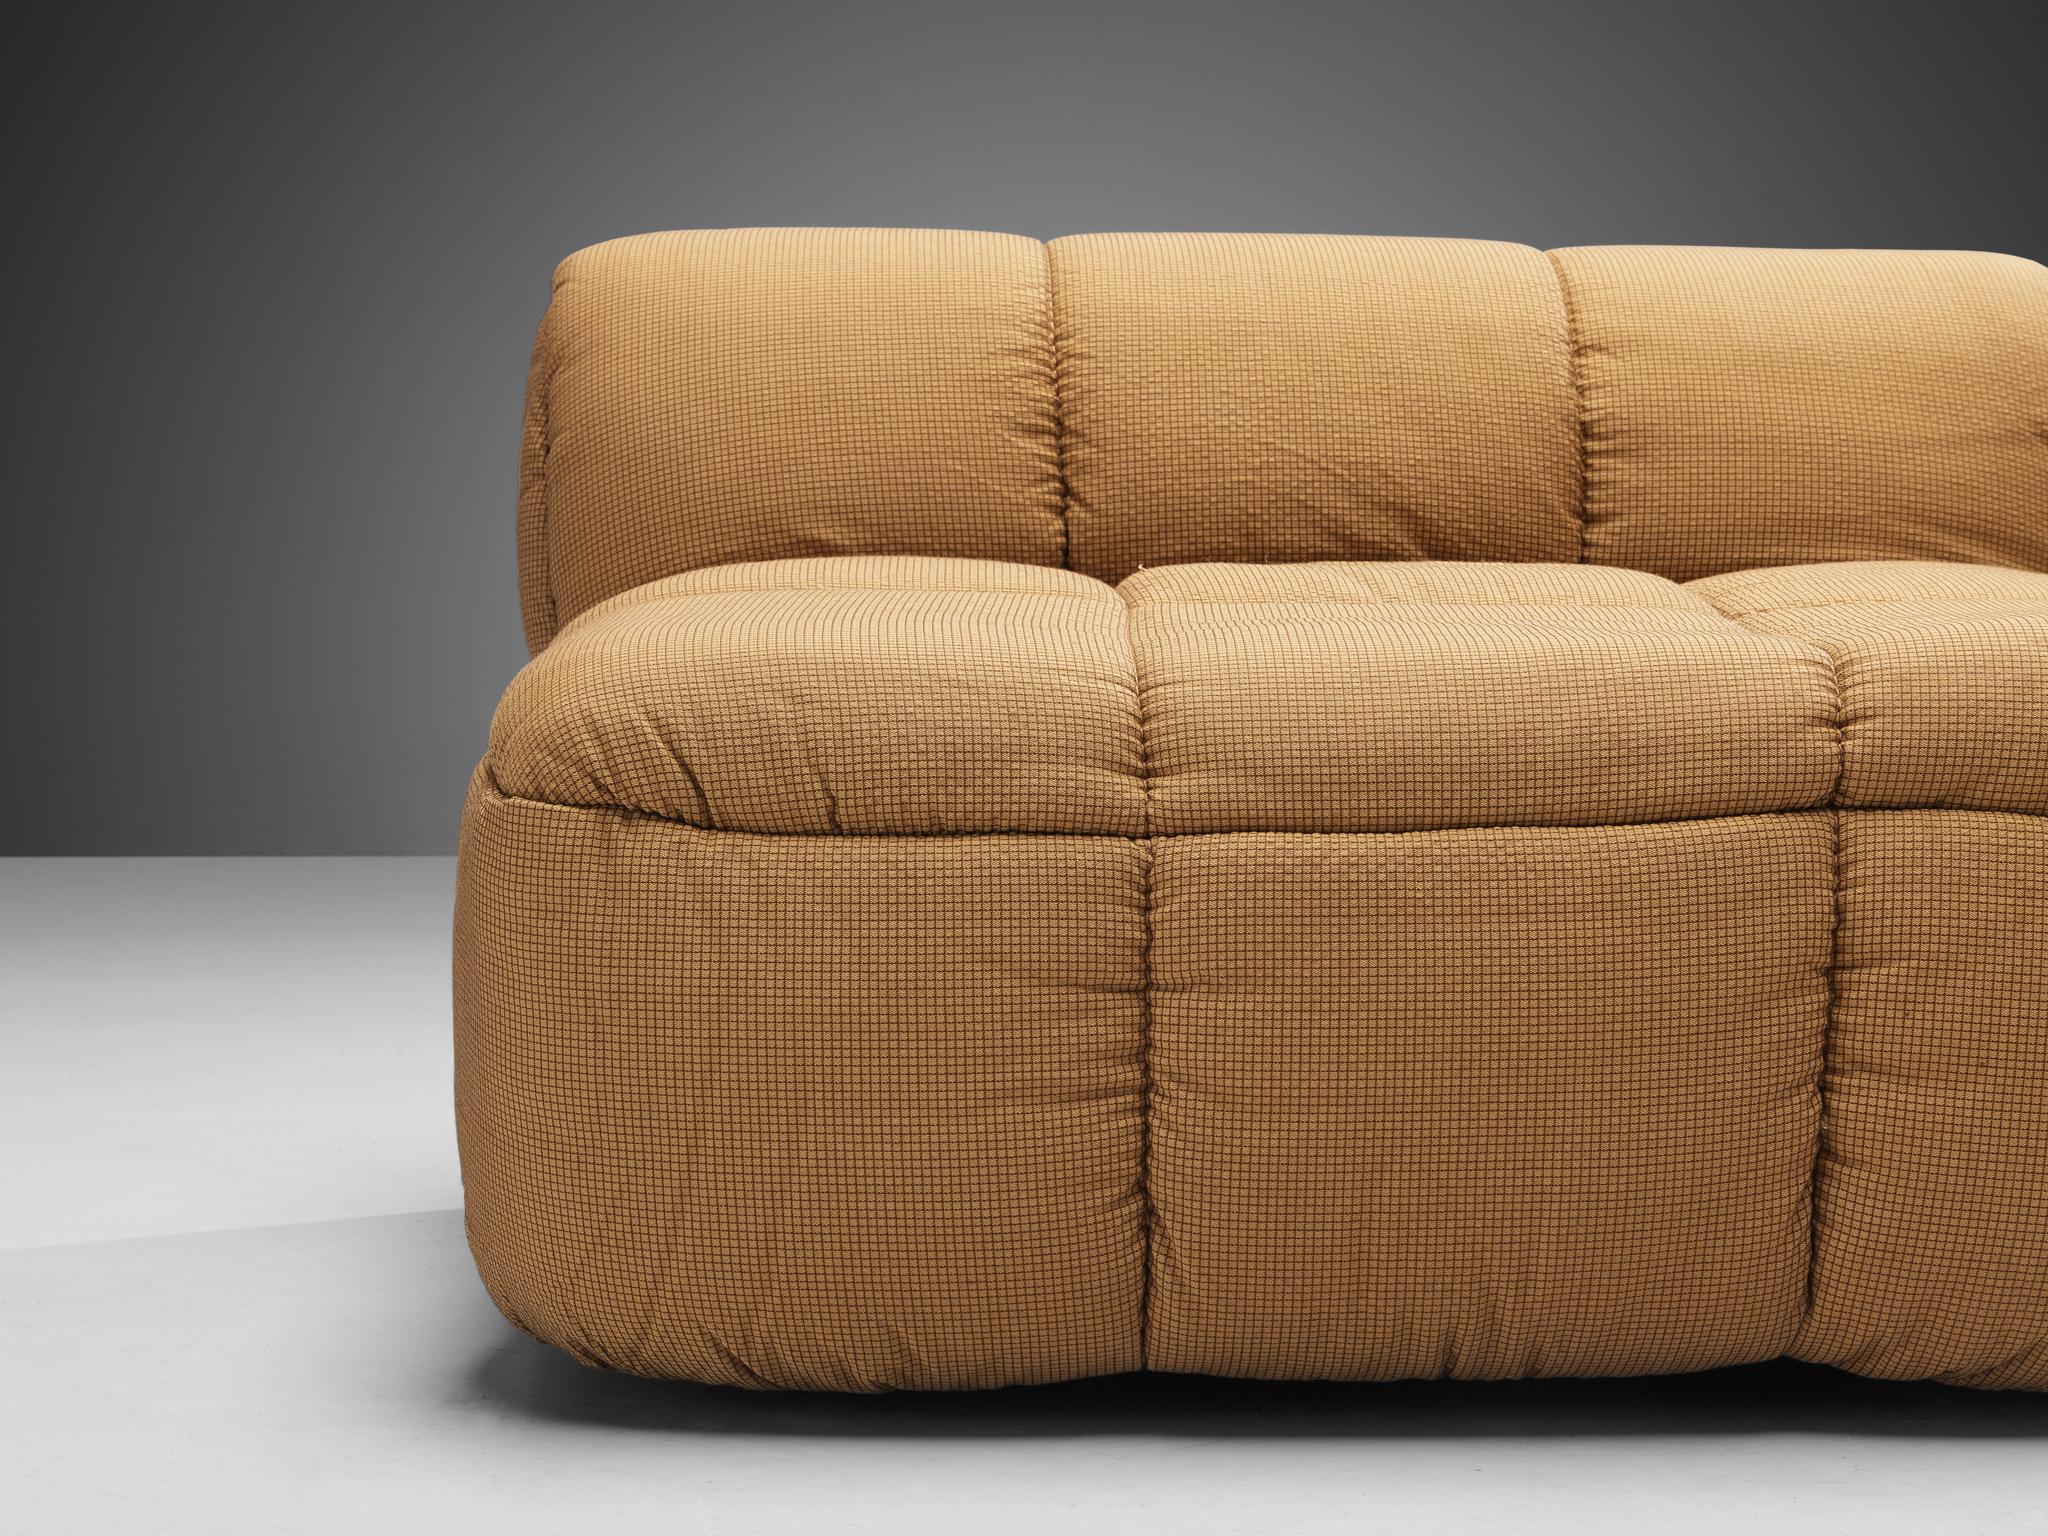 Fabric Cini Boeri for Arflex Modular 'Strips' Pair of Two-Seater Elements  For Sale